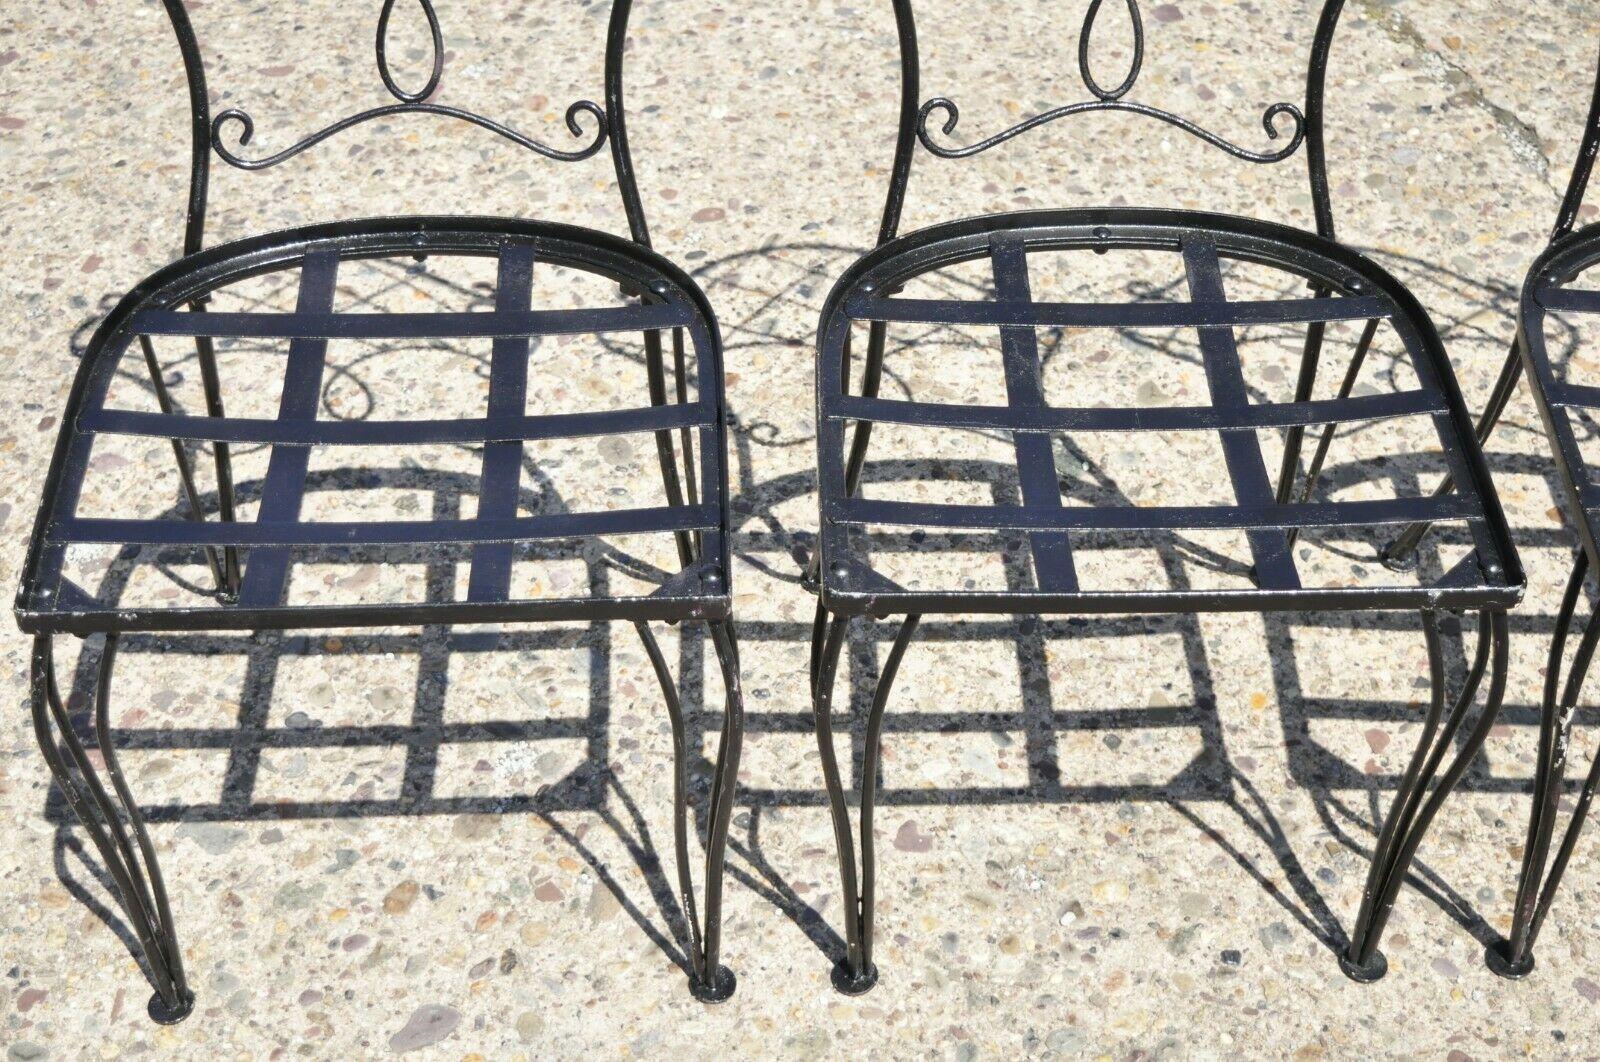 20th Century Vintage Wrought Iron Garden Patio Dining Set Square Table 4 Chairs - 5 Pc Set